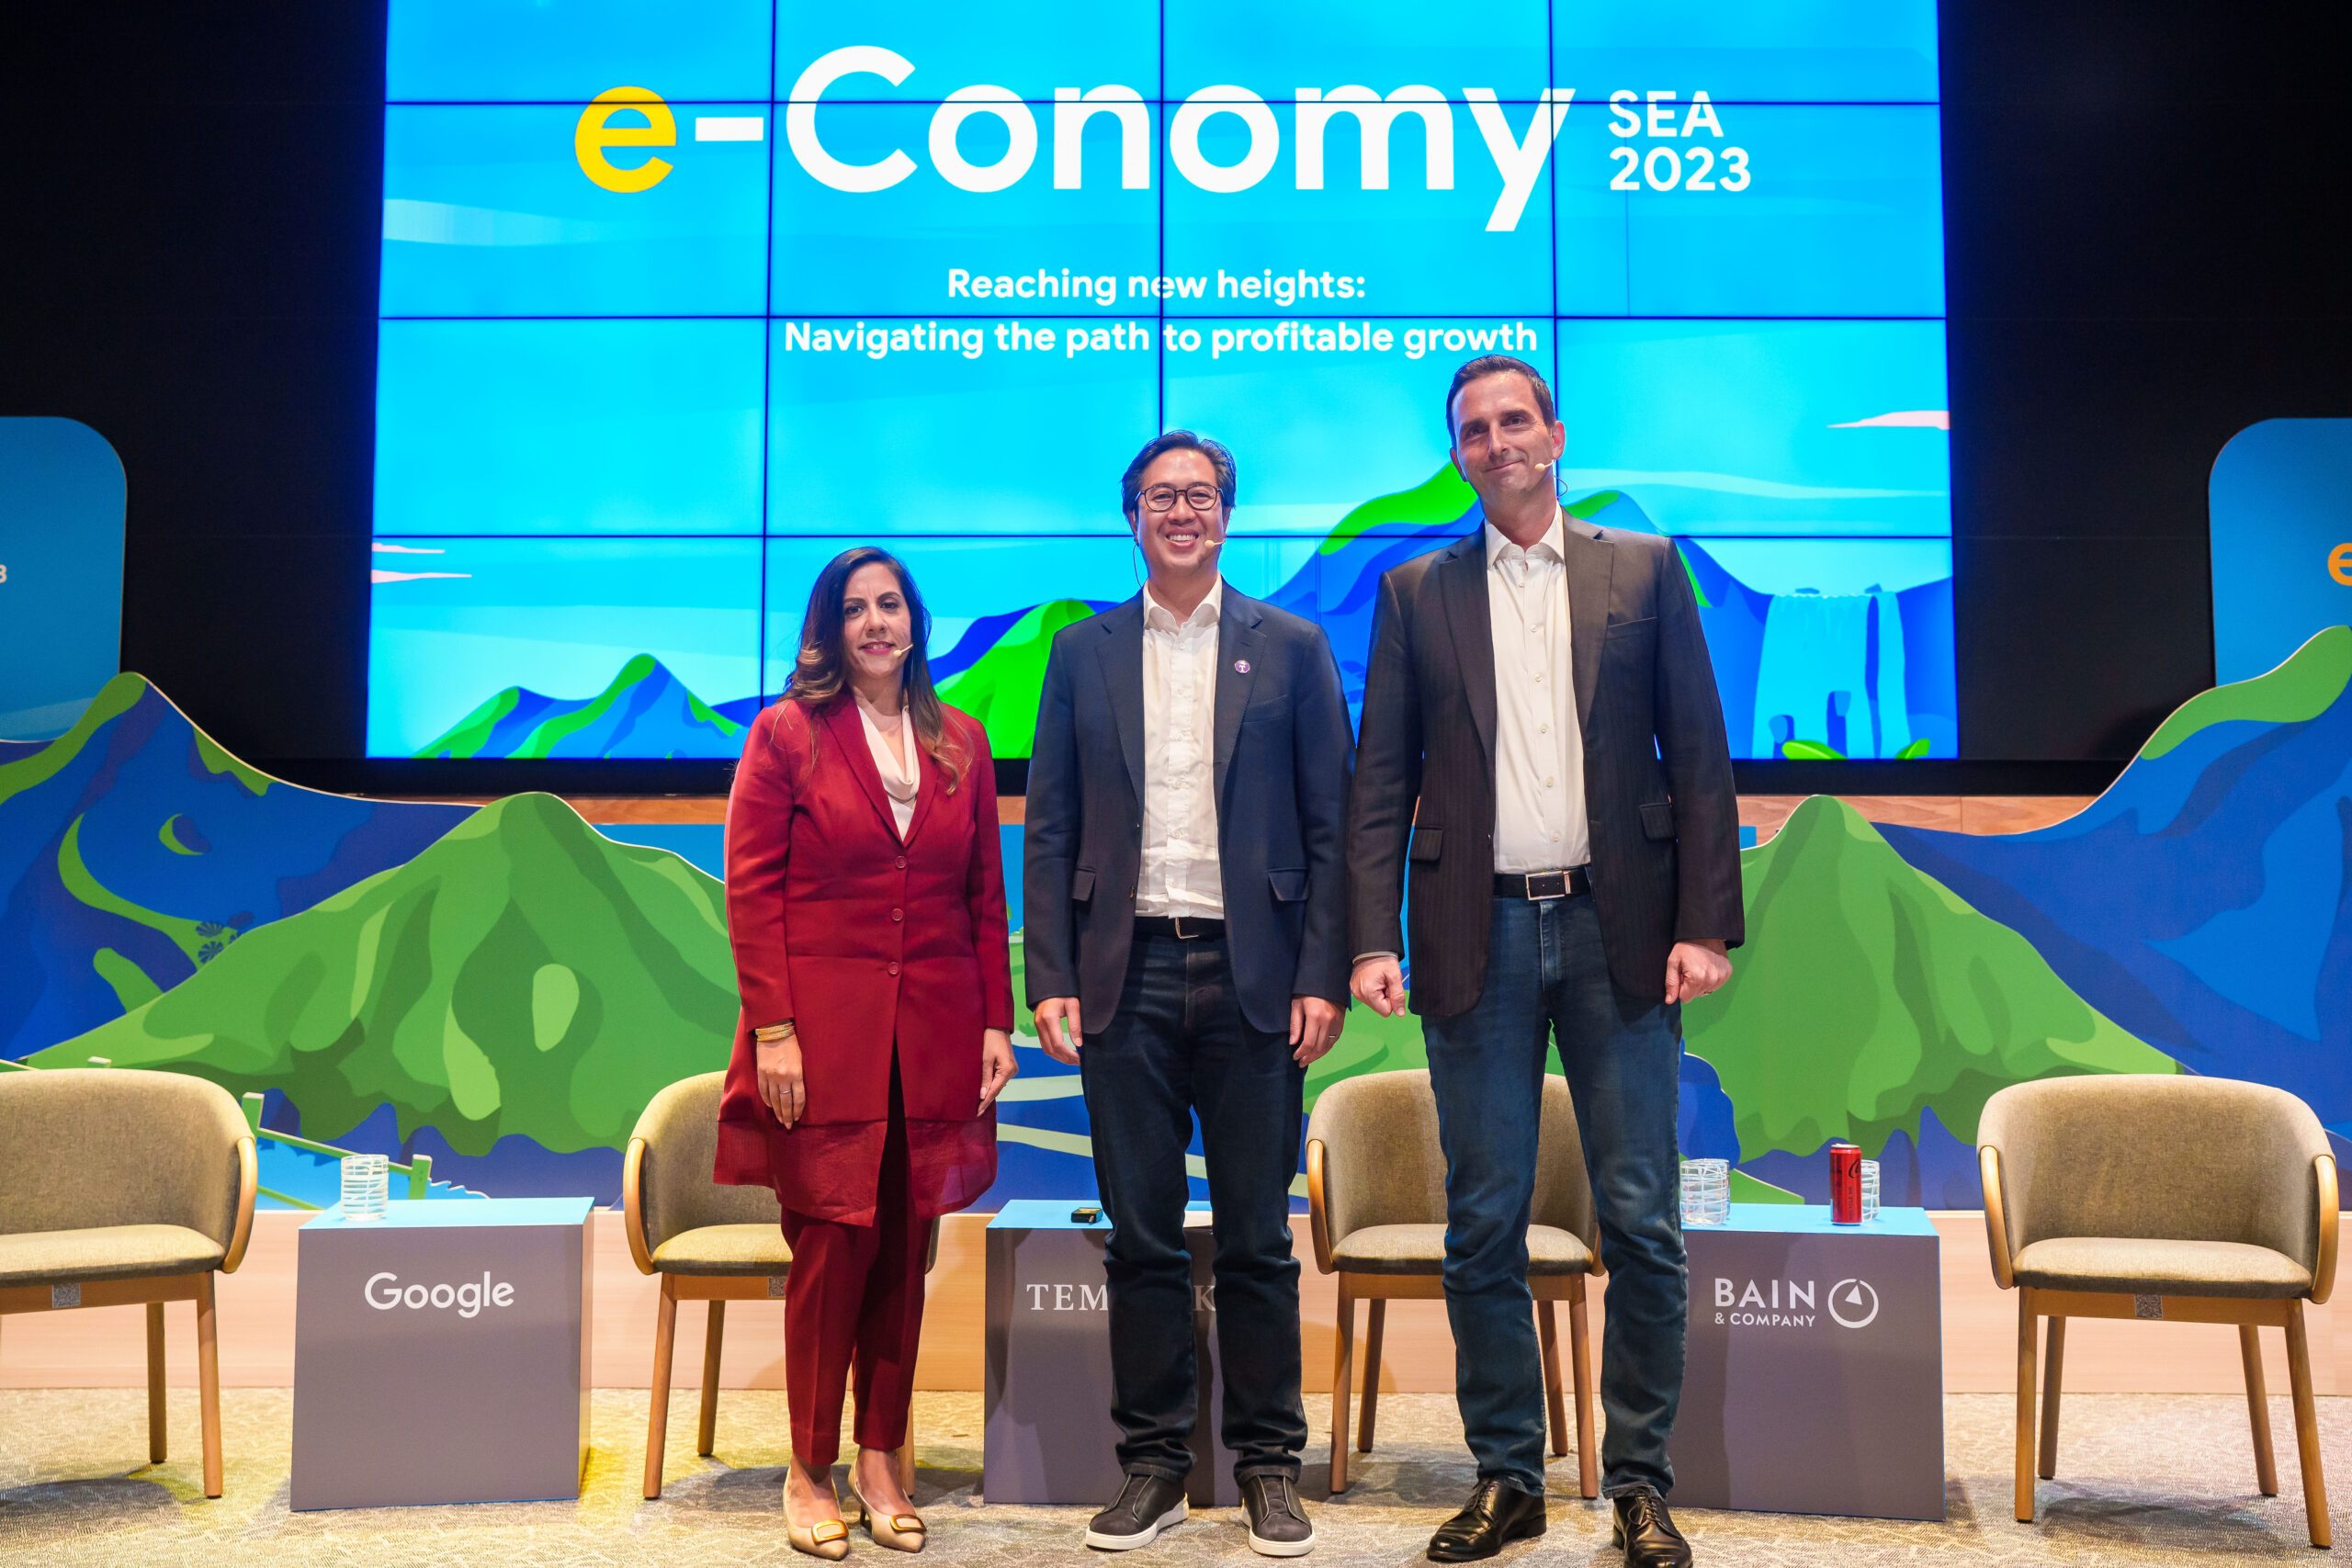 Private funding in SE Asian startups at six-year low: e-Conomy SEA 2023 report